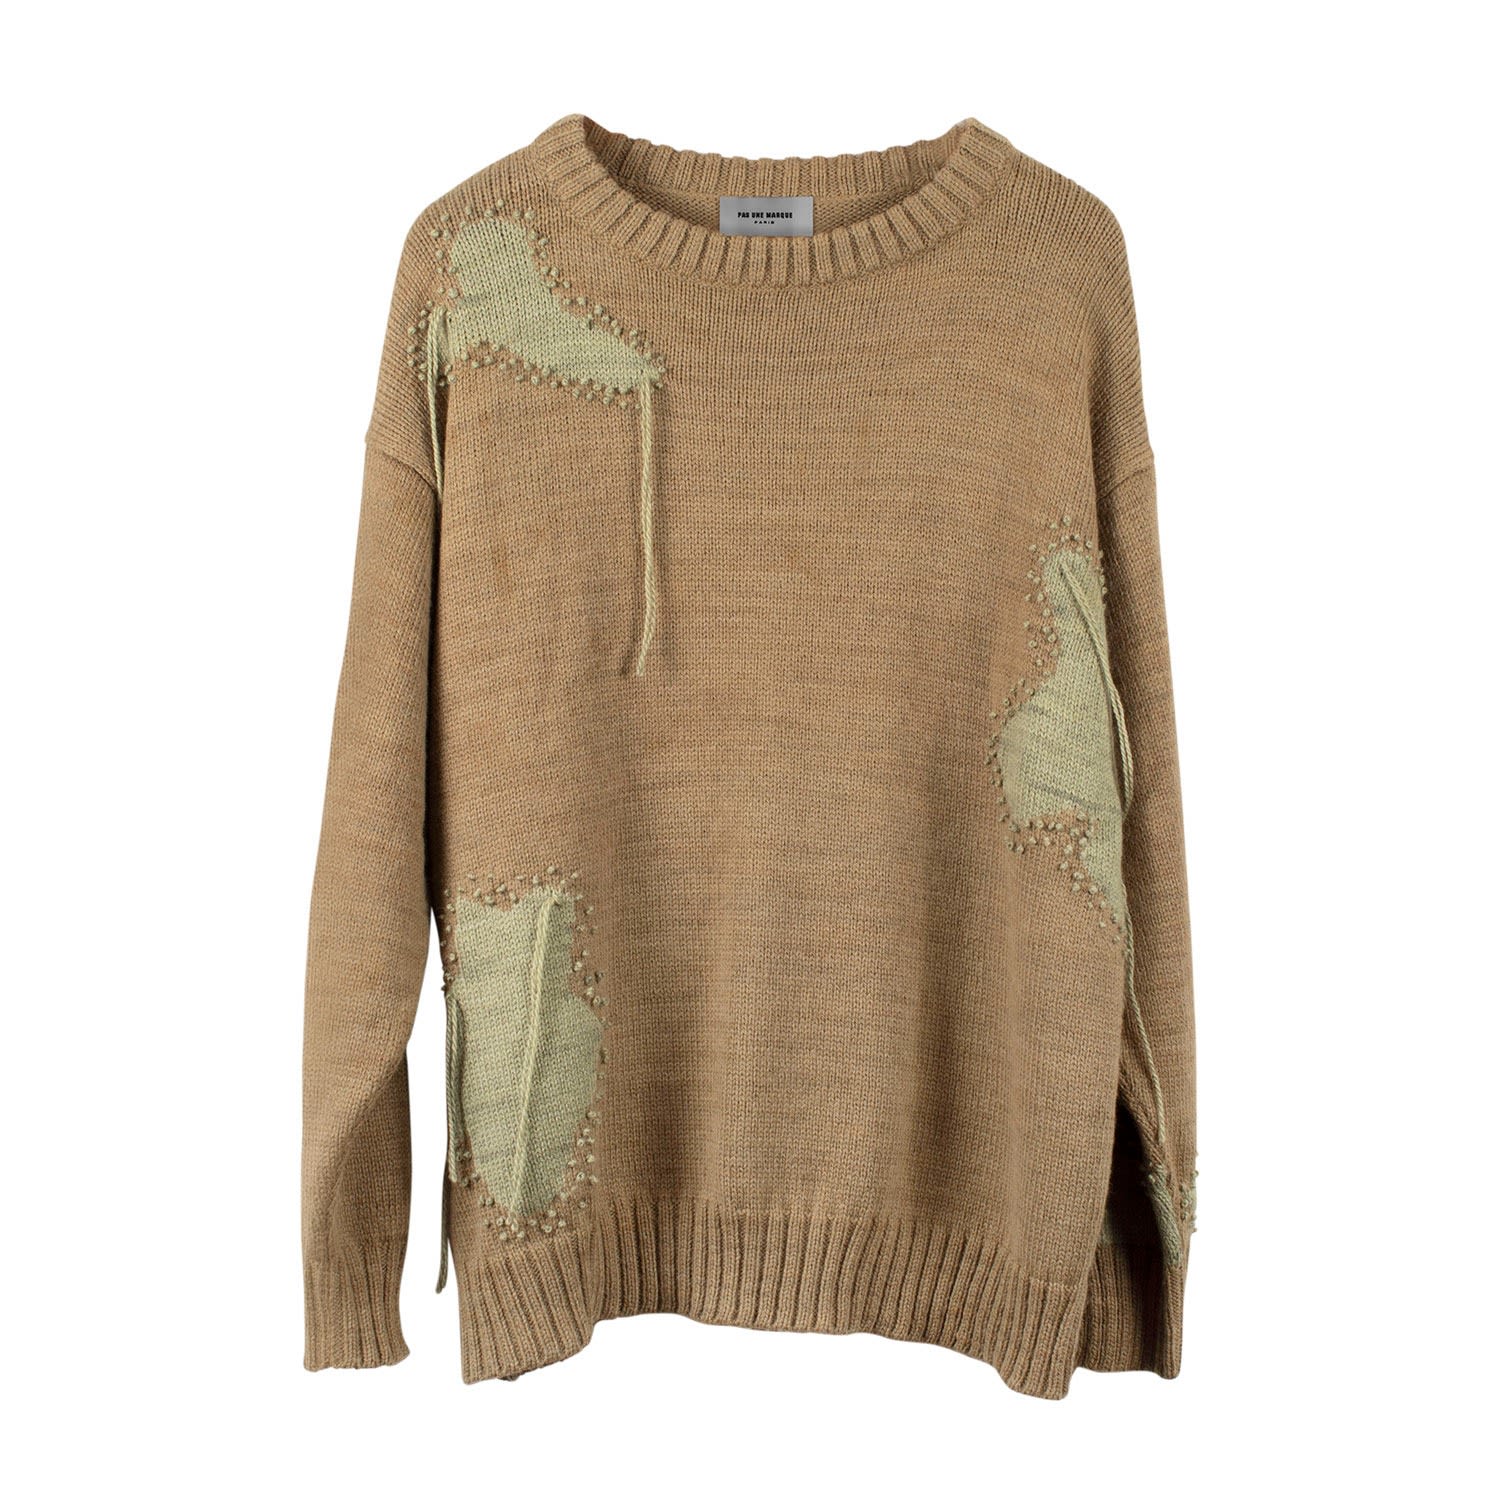 Men's Neutrals Knitted Distressed Sweatshirt Moss Green Small Pas Une Marque